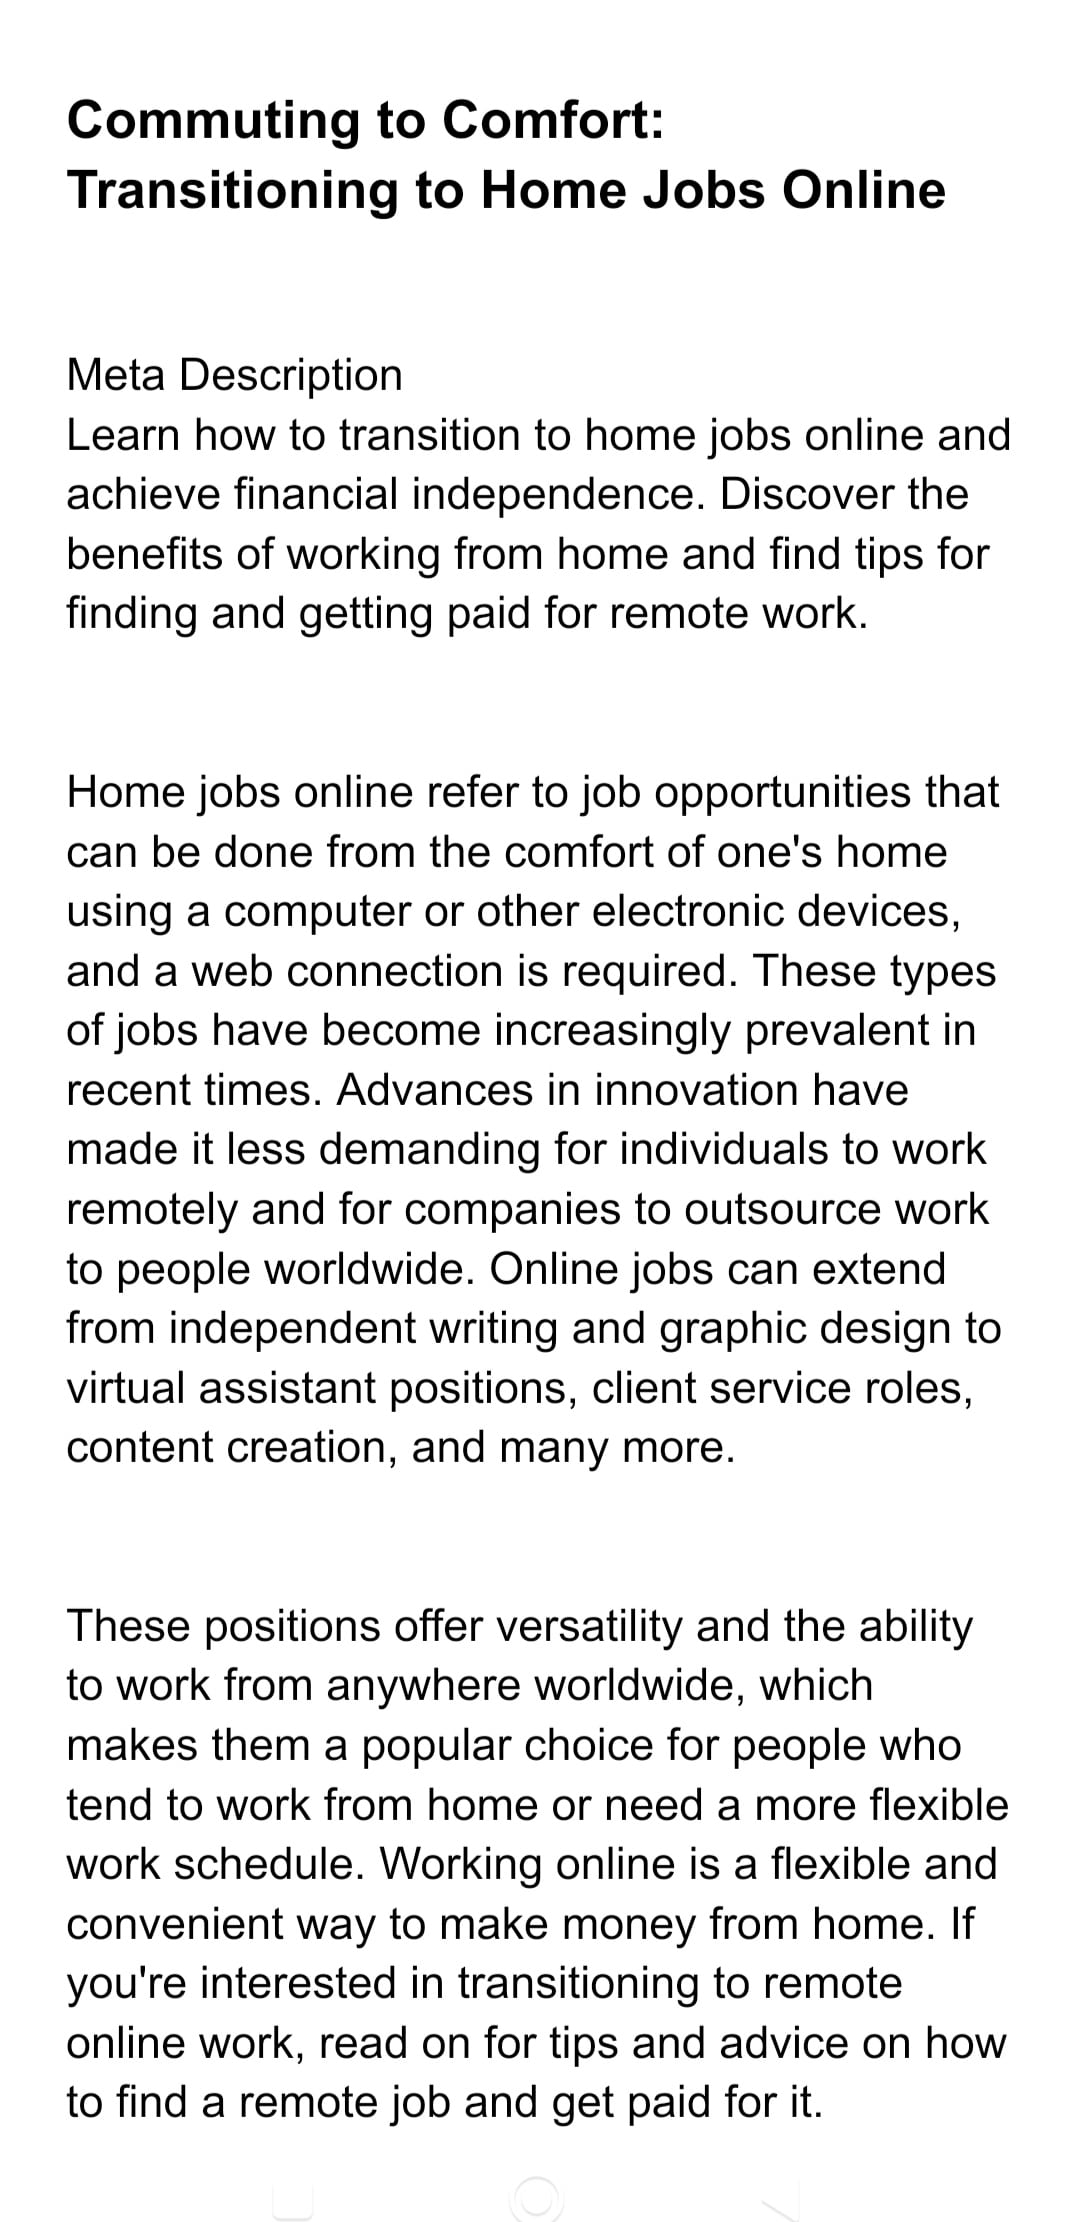 The Ultimate Guide to Finding and Succeeding in Home Jobs Online